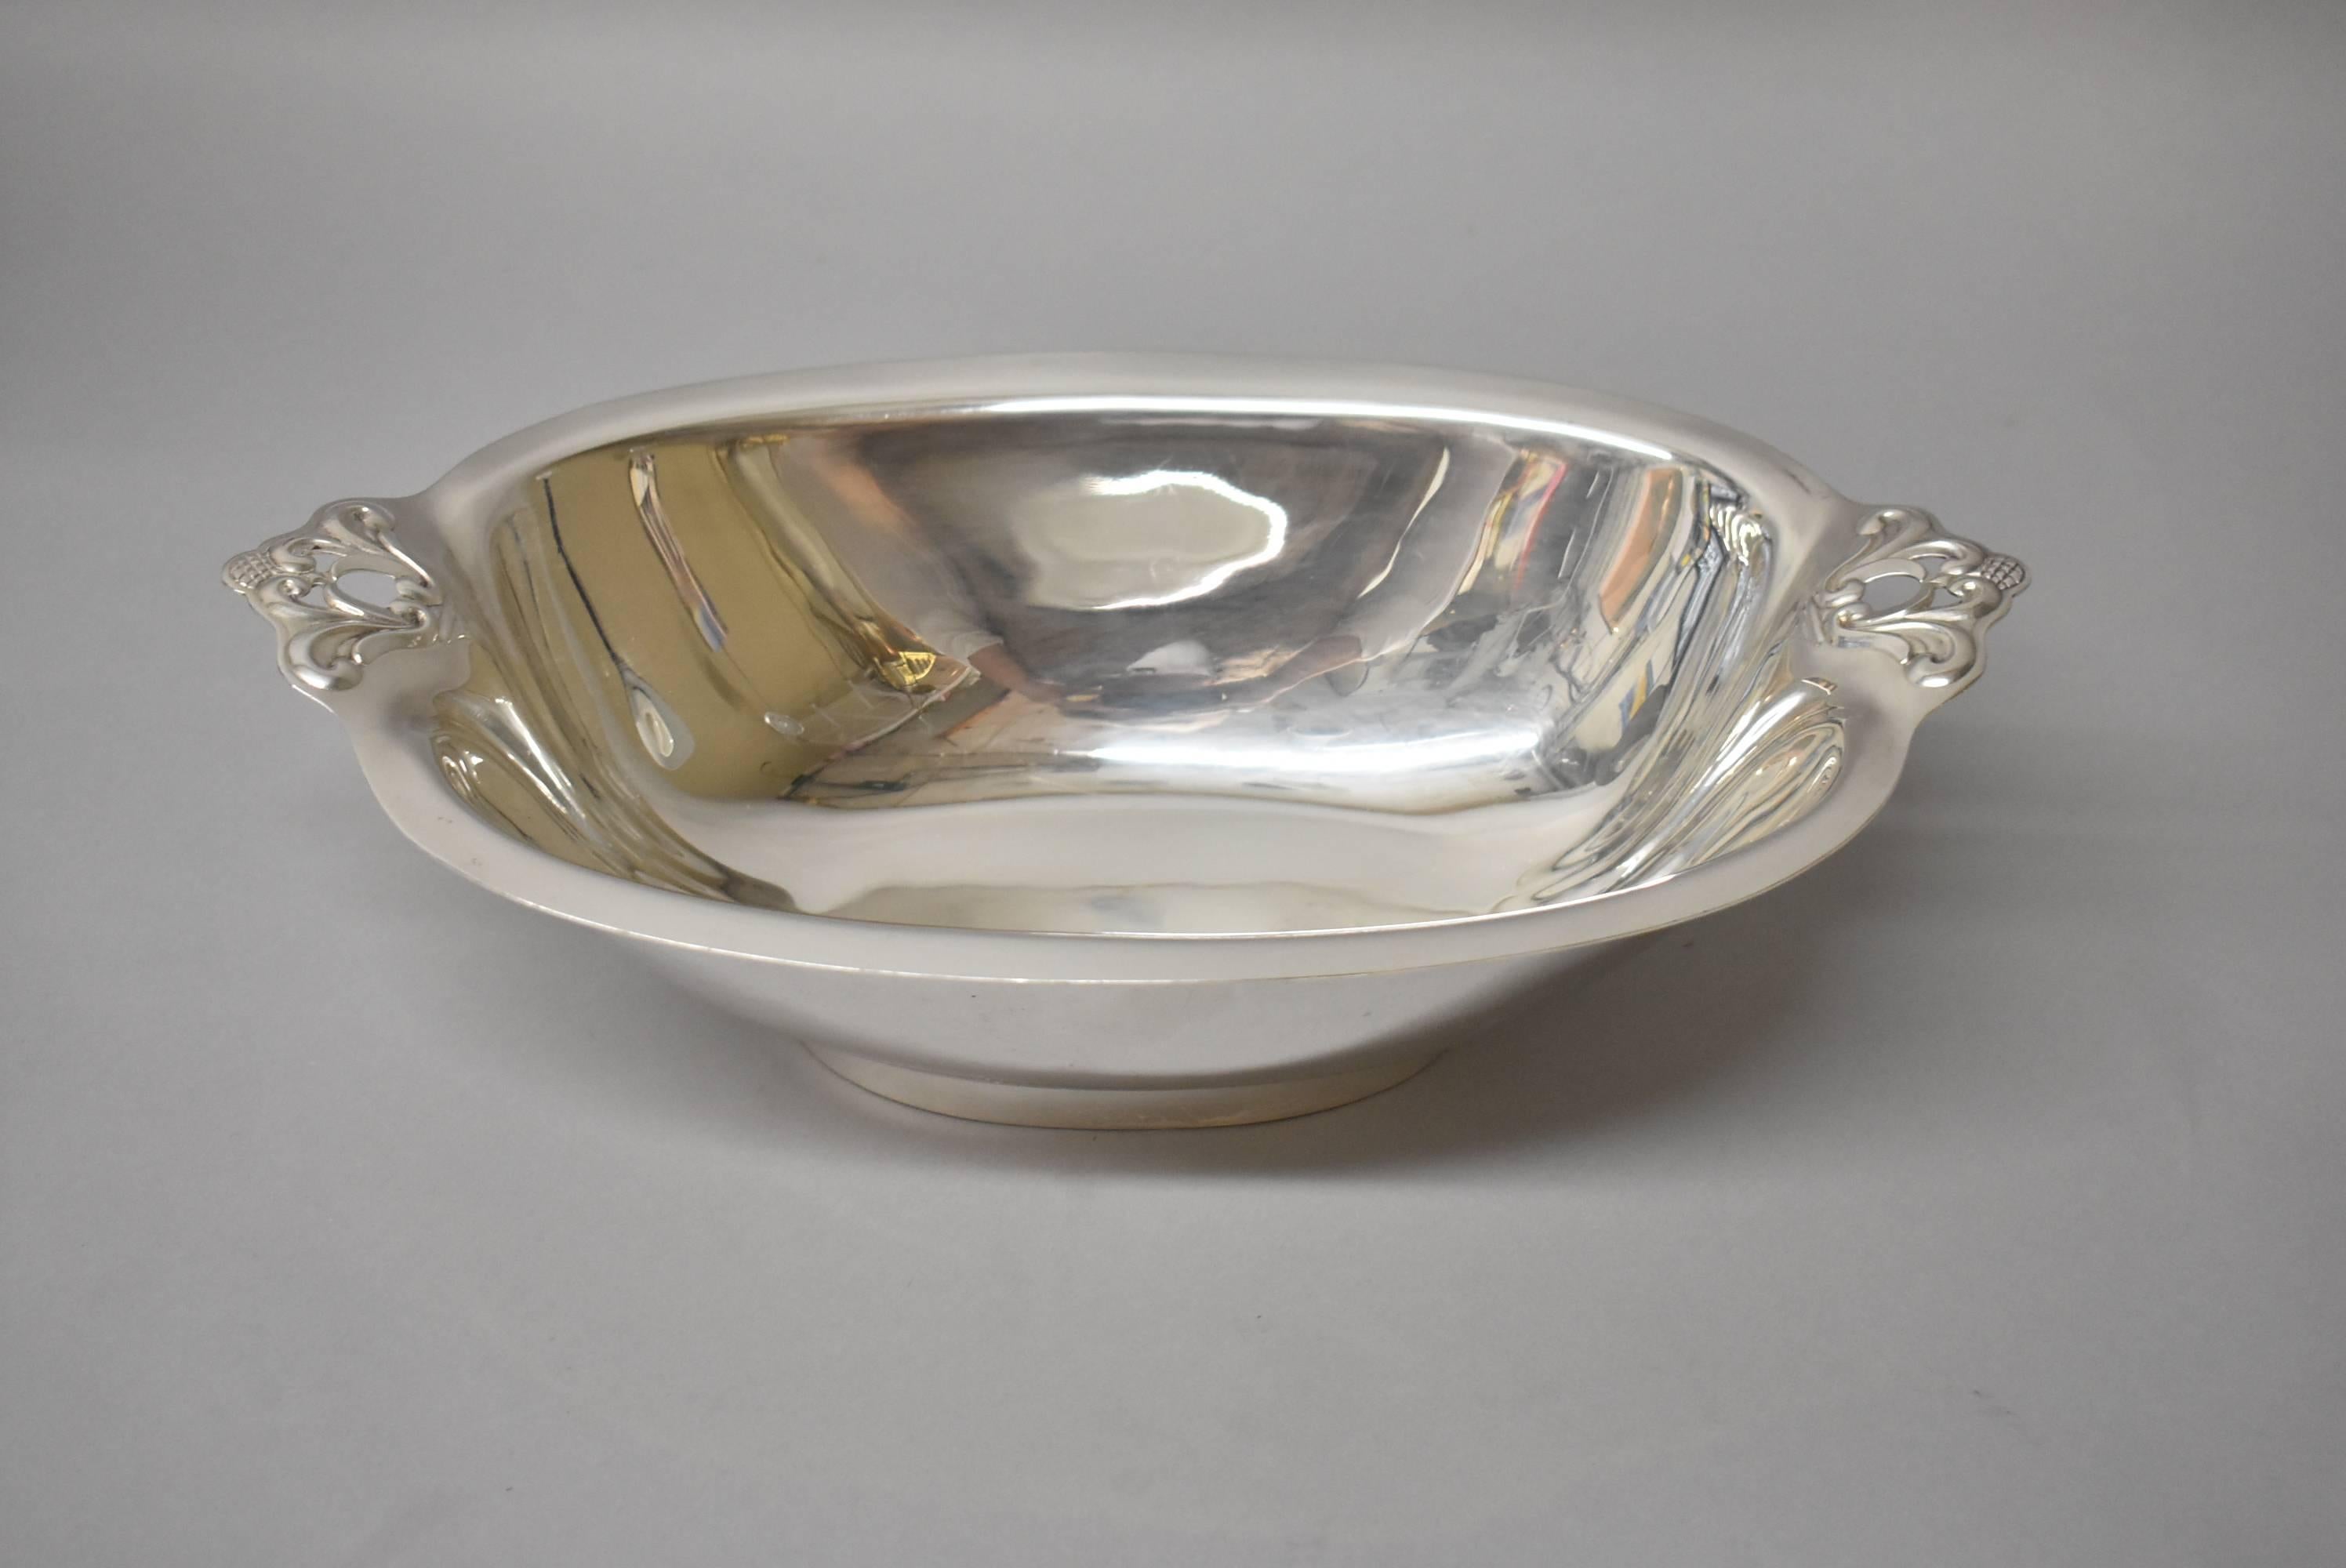 A large sterling silver Royal Danish V133-2 International sterling fruit bowl. This beautiful bowl is marked on the bottom and weighs 25 troy ounces. Measure: It is 13